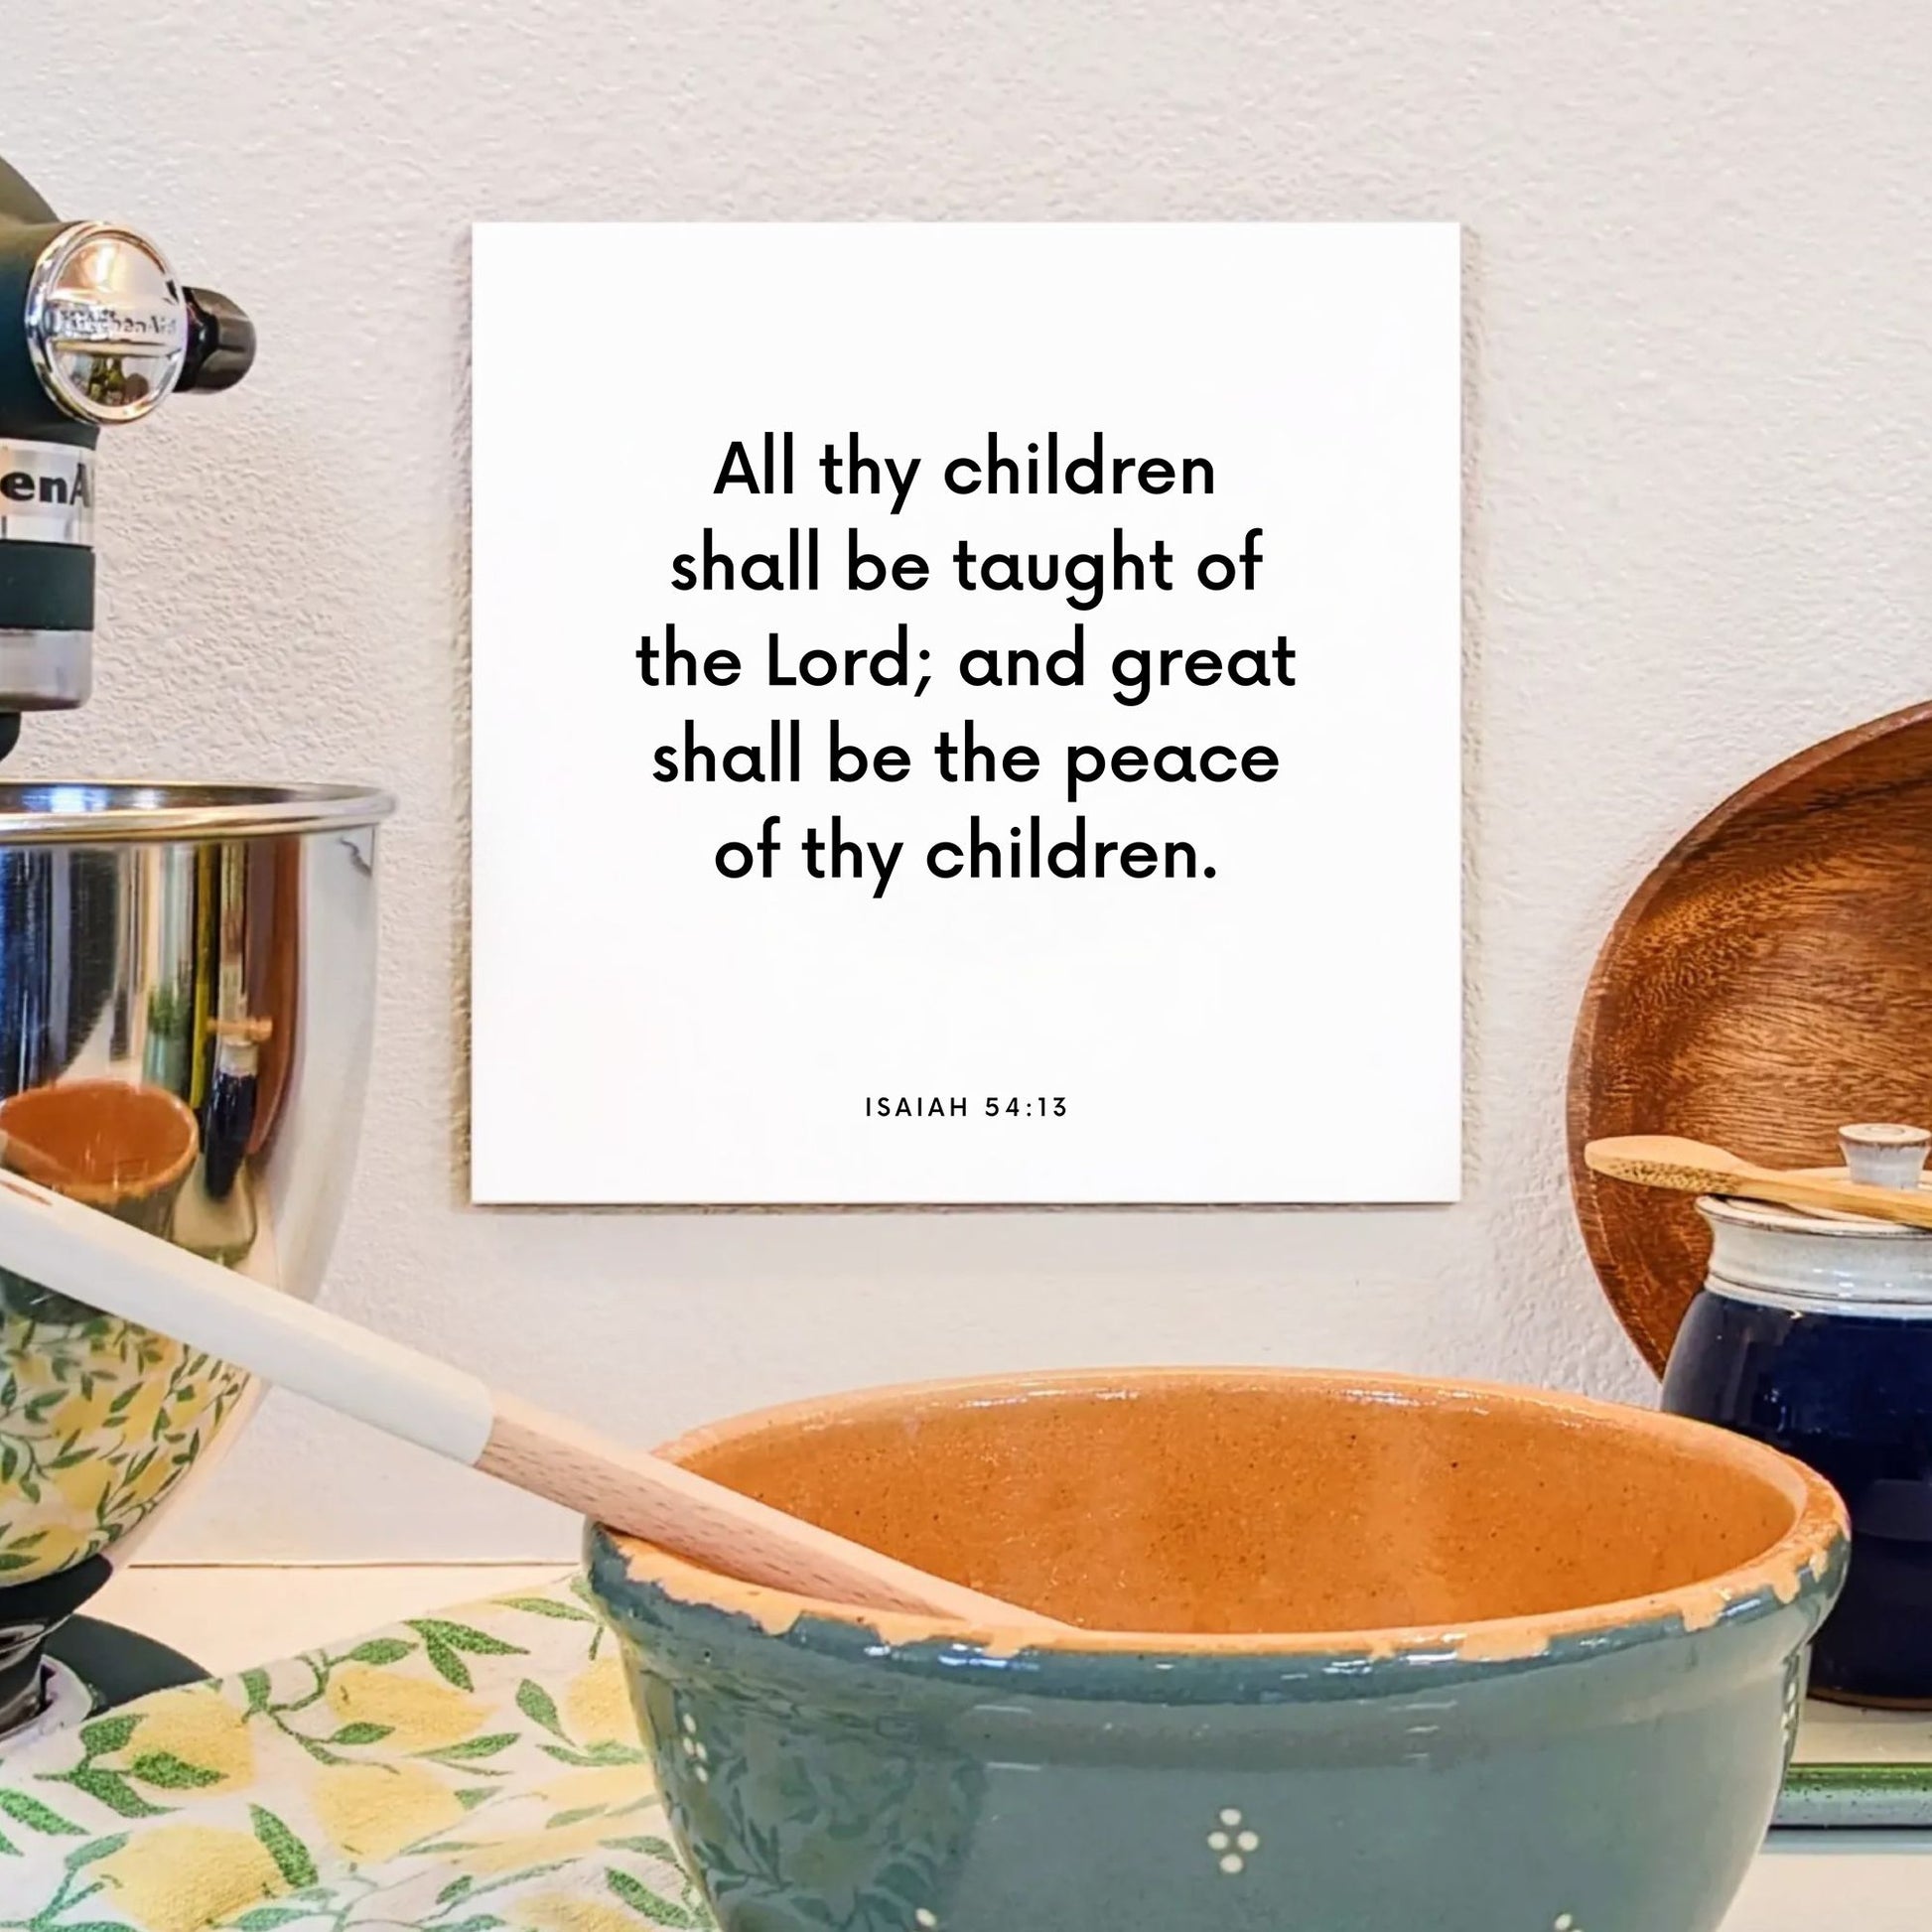 Kitchen mouting of the scripture tile for Isaiah 54:13 - "All thy children shall be taught of the Lord"